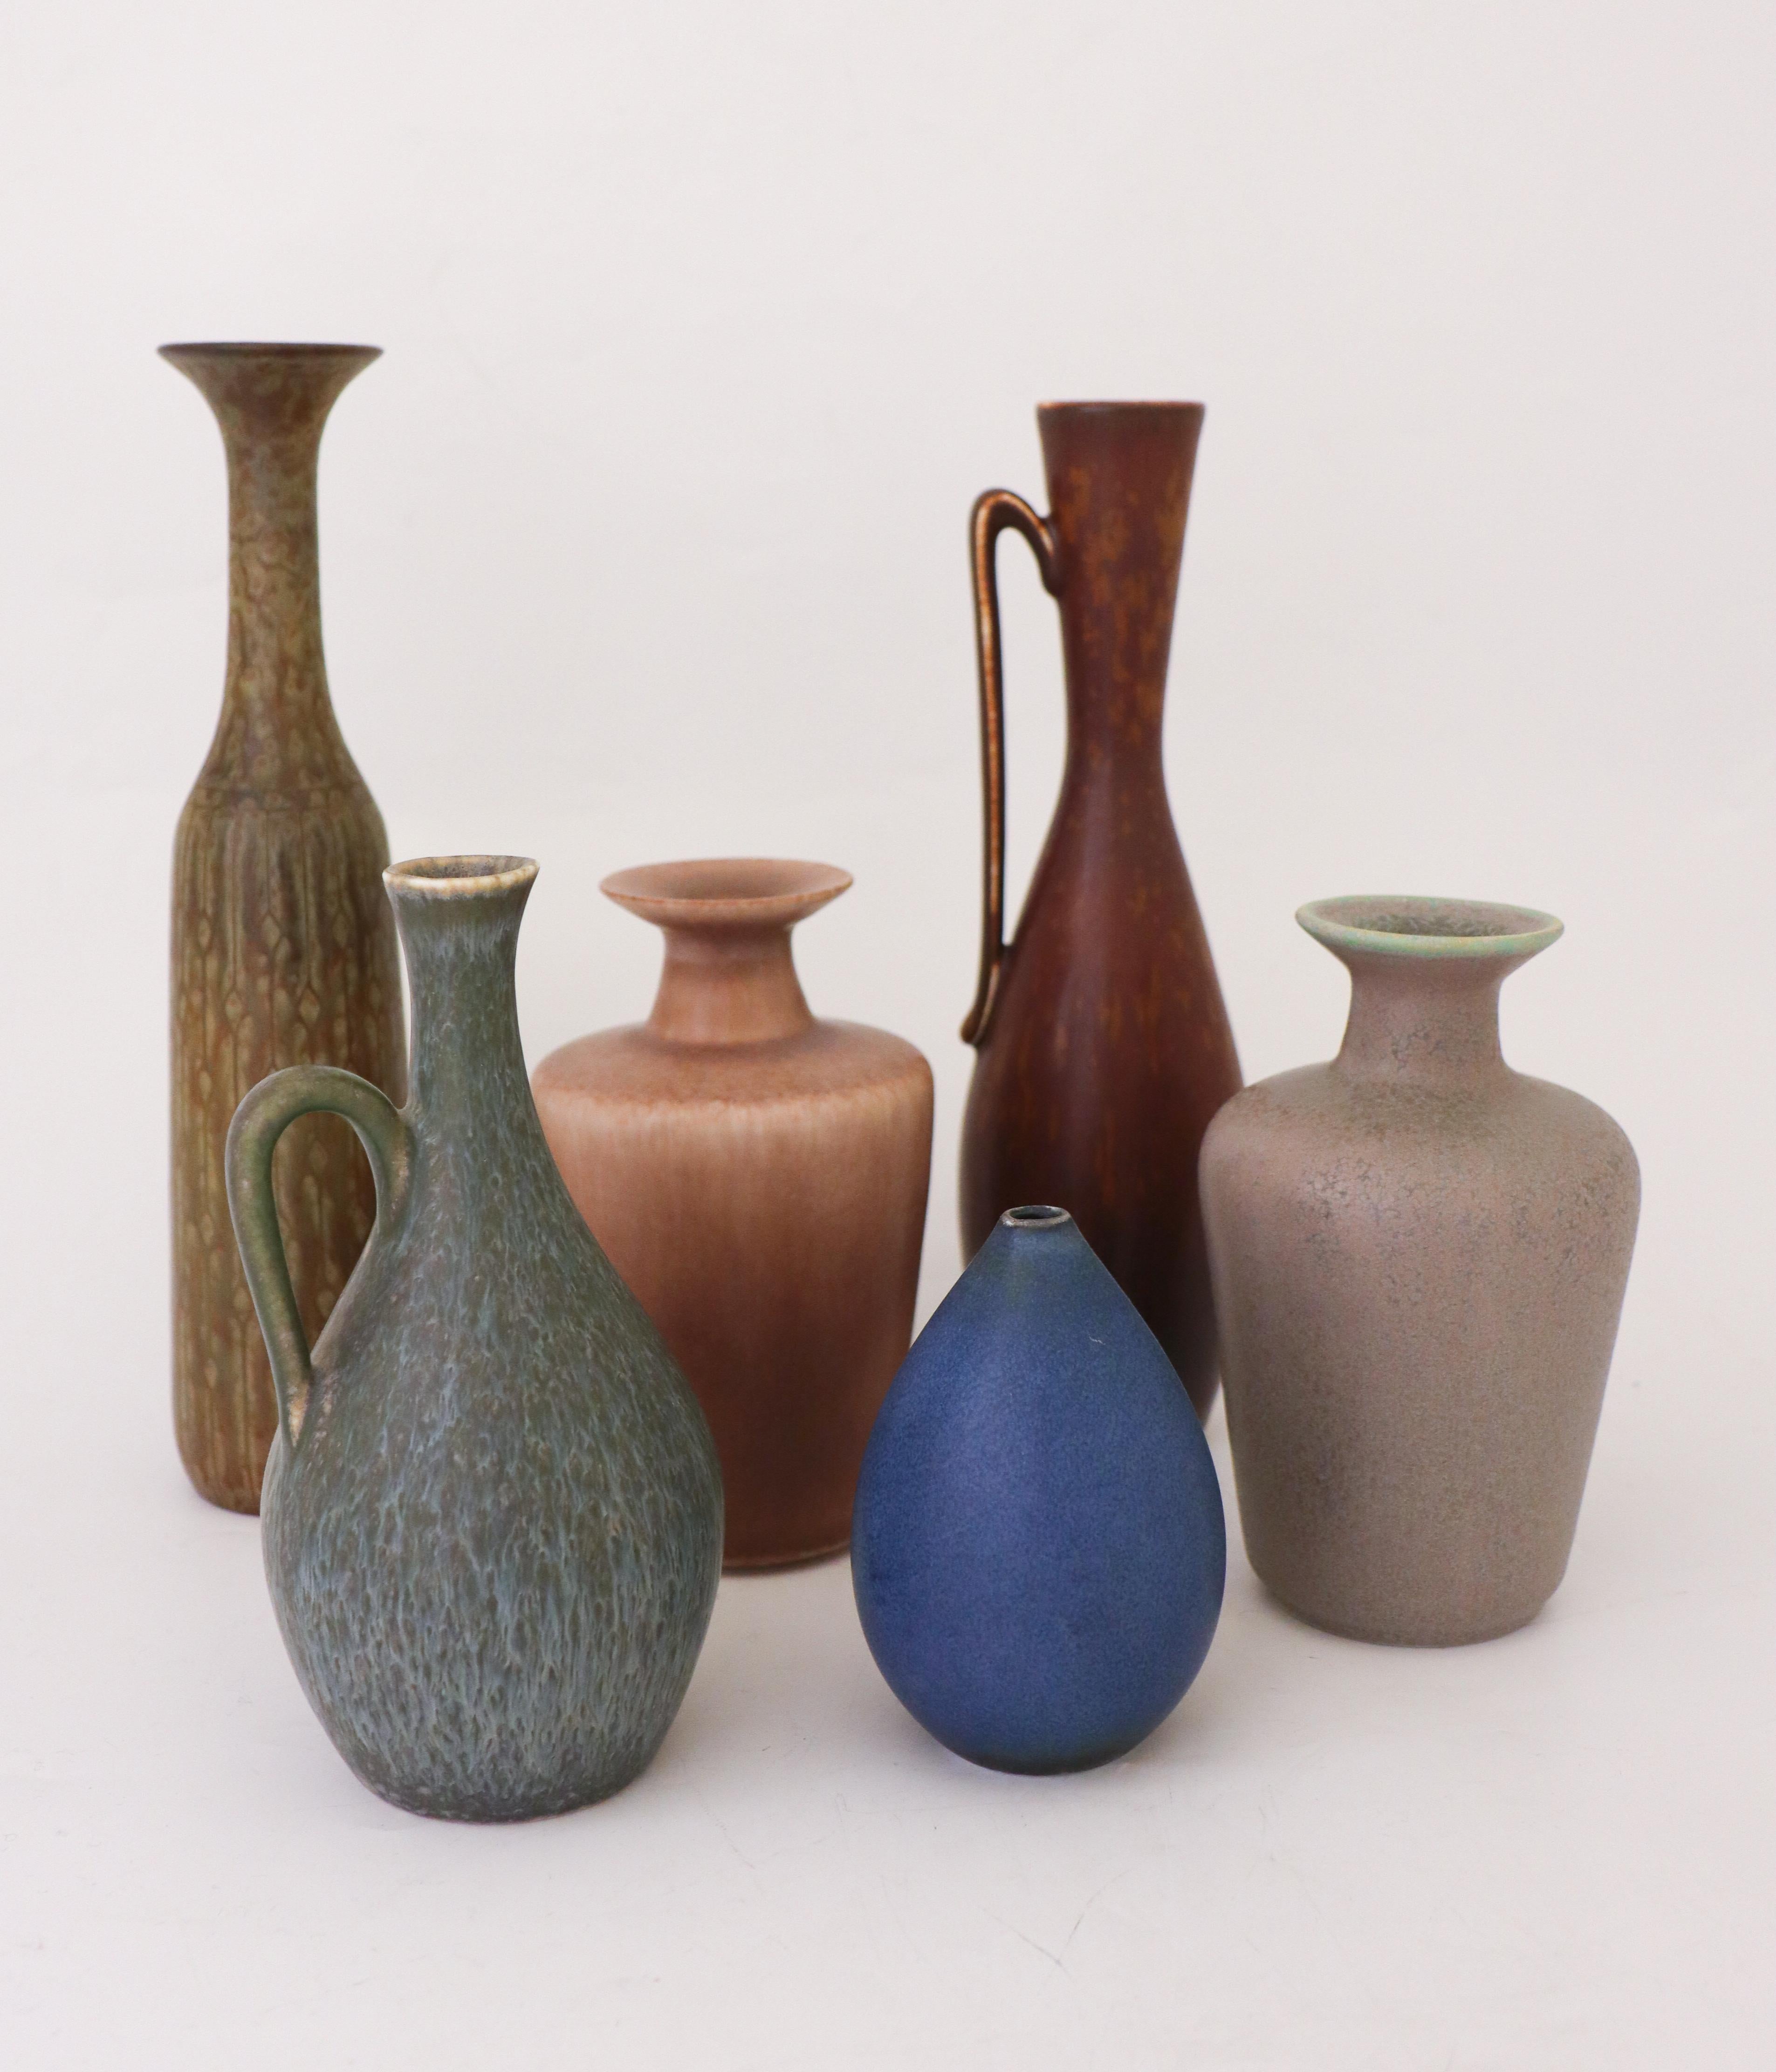 A group of six vases designed by Gunnar Nylund and Carl-Harry Stålhane at Rörstrand, the pieces are between 25.5 - 9.5 cm high. The set contains 4 vases by Gunnar Nylund and two vases by Carl-Harry Stålhane. Four vases are first quality and two of